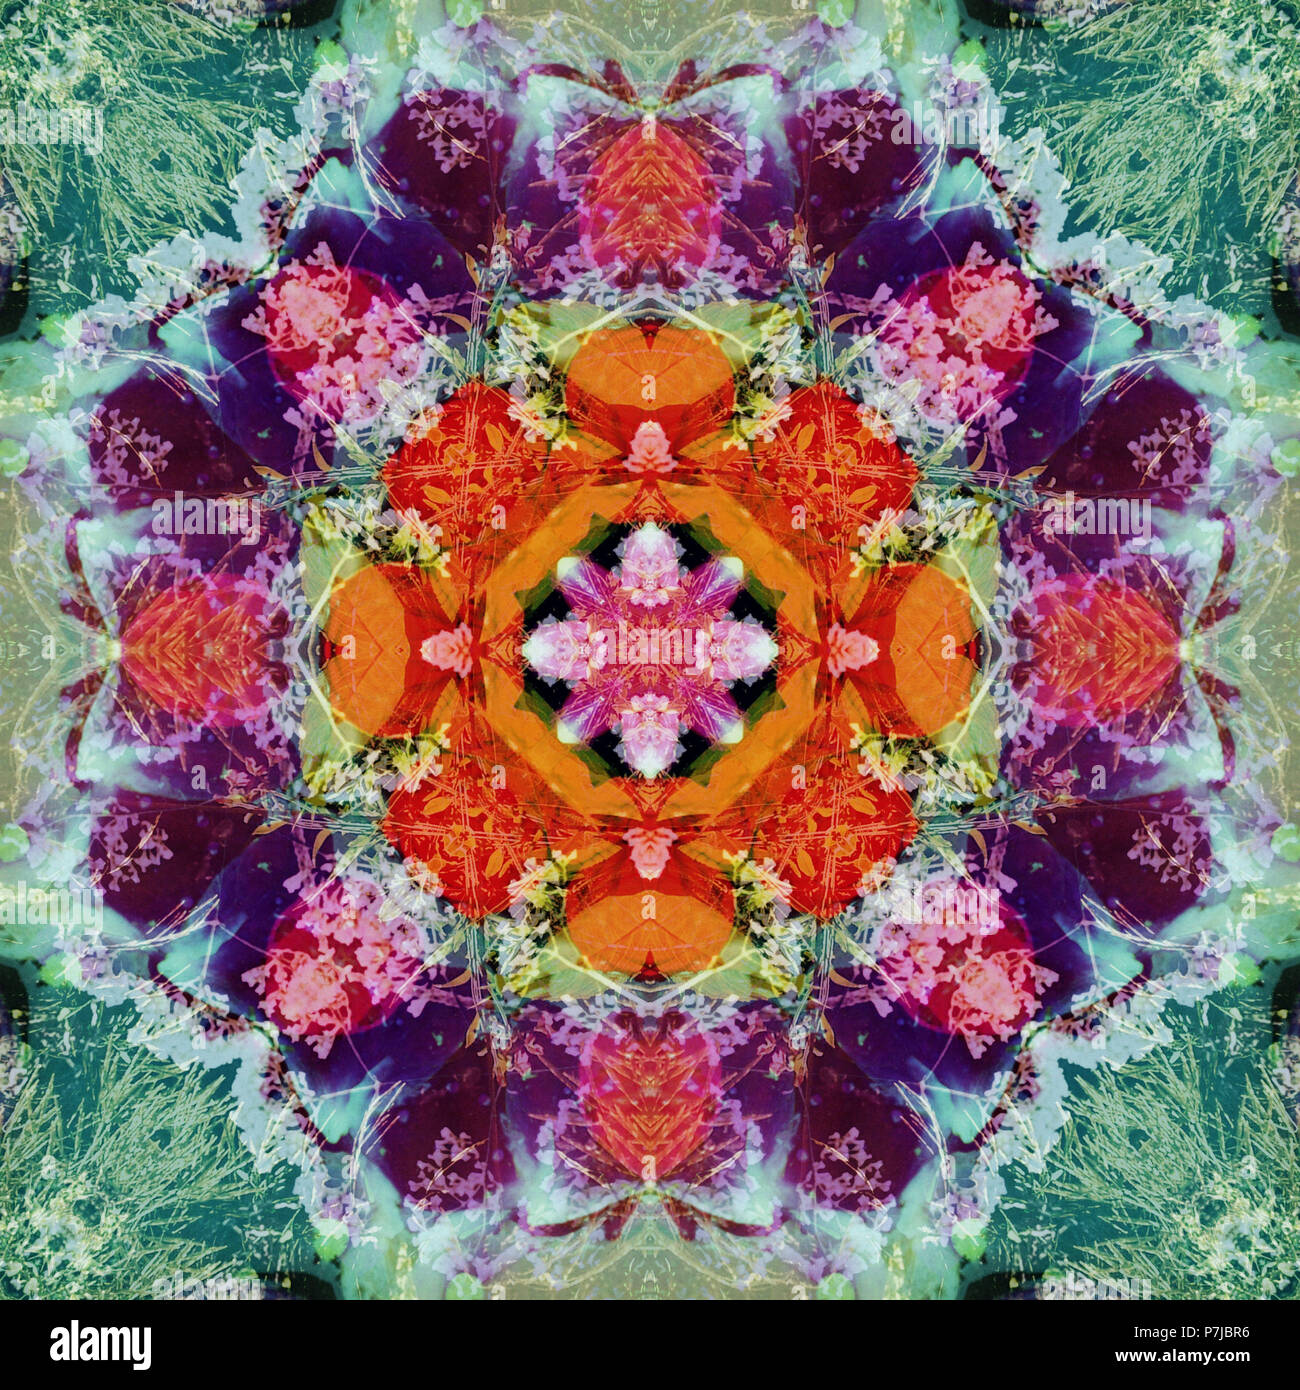 Composing of flowers in a mandala ornament Stock Photo